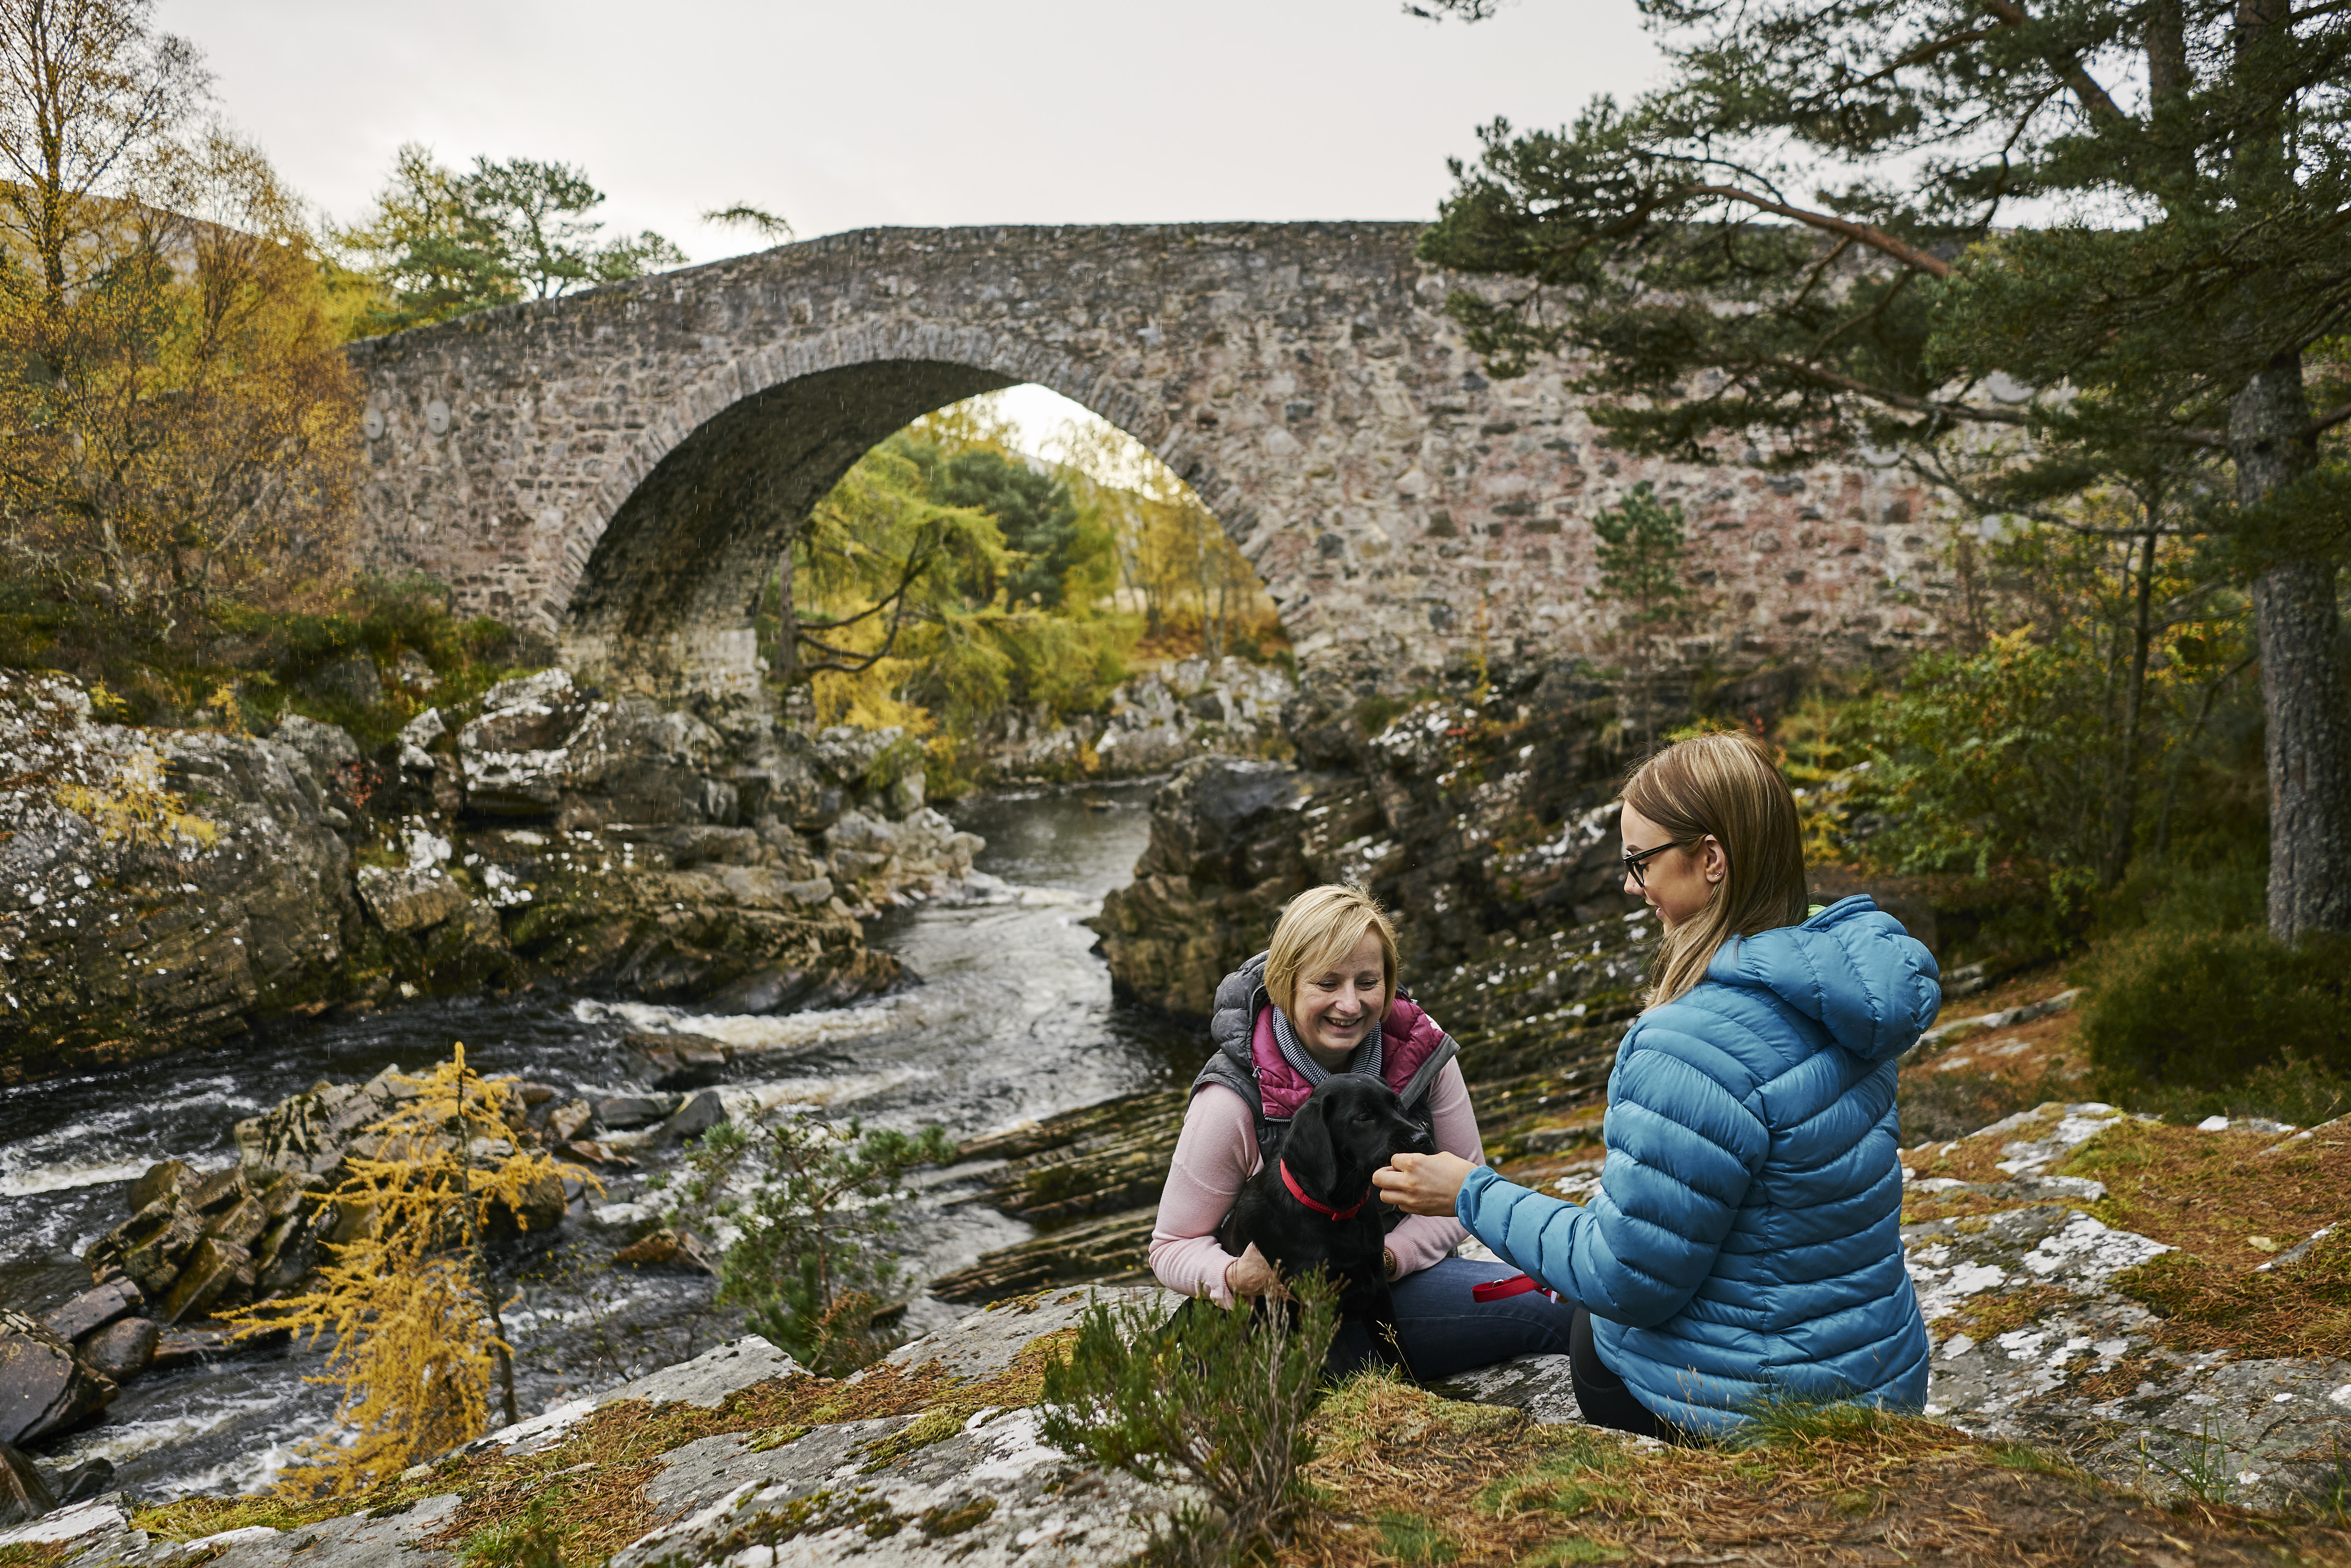 Two women sitting along the river bank with their dog, a stone bridge in the background, Little Garve